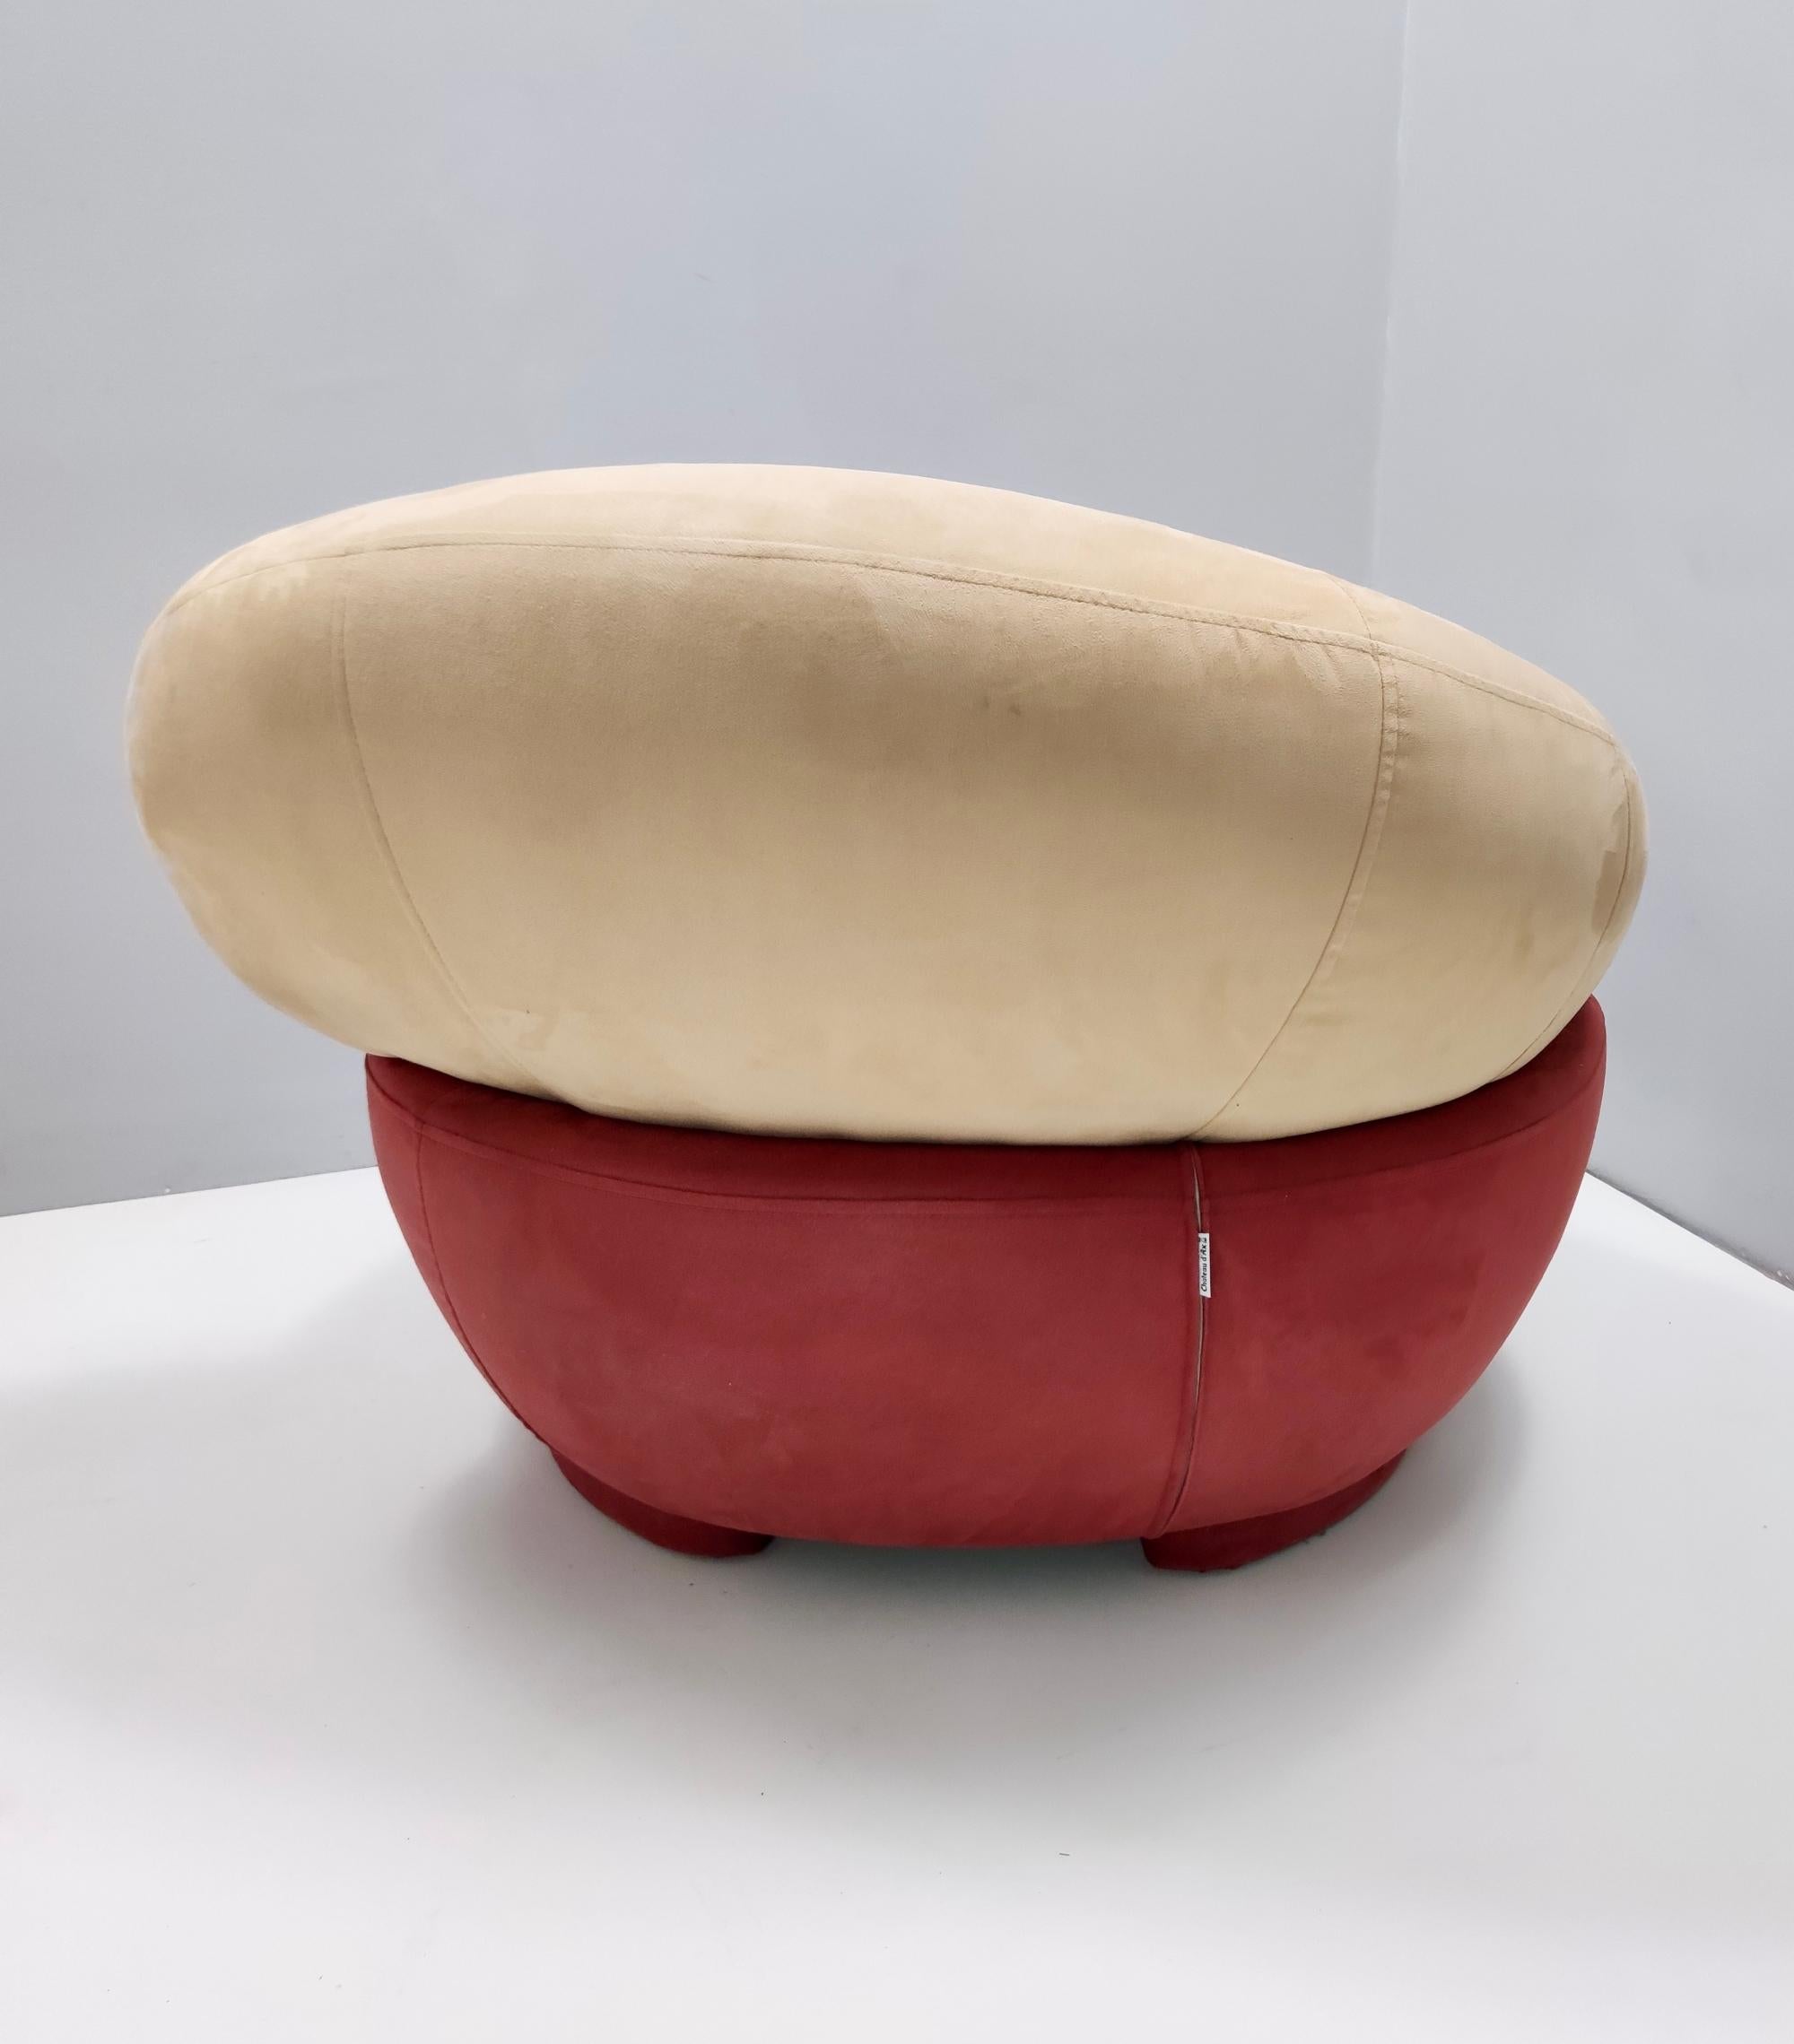 Fabric Postmodern Lounge Chair with a Beige and Crimson Alcantara Upholstery, Italy